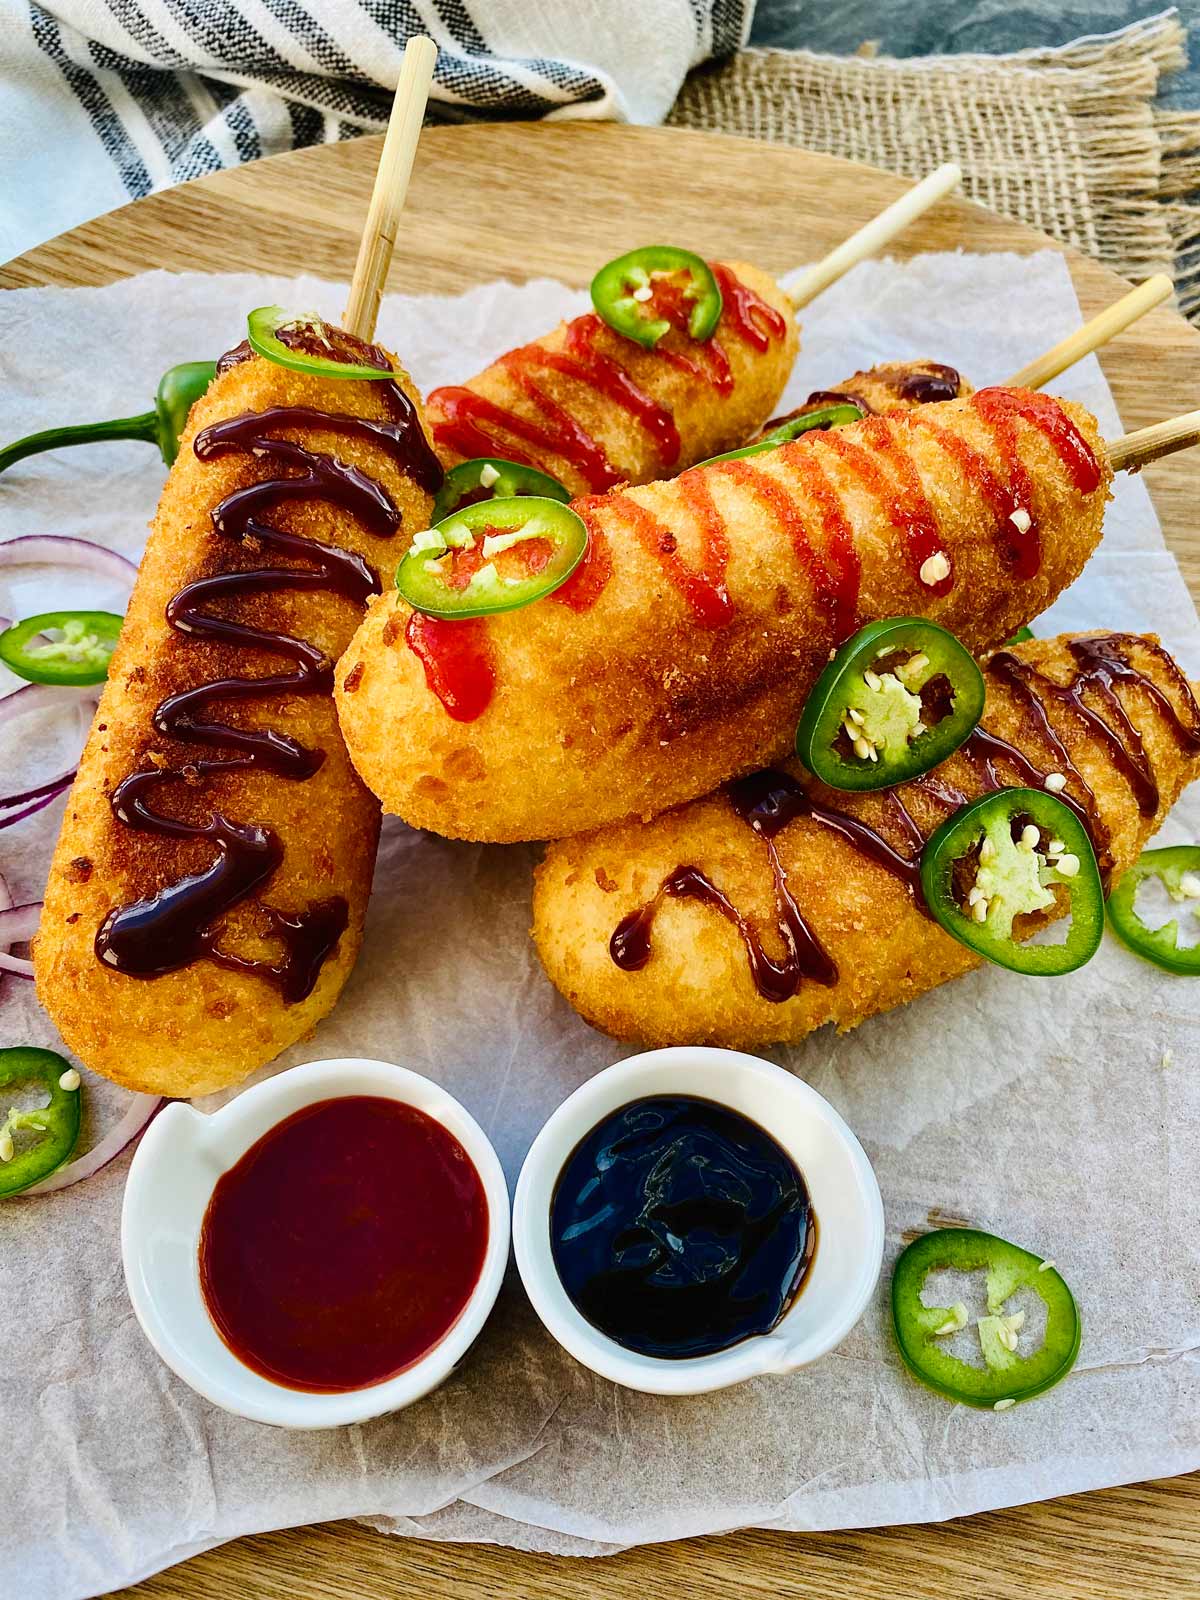 Korean corn dogs on a wooden plate with two tiny white serving dishes filled with red and brown sauces